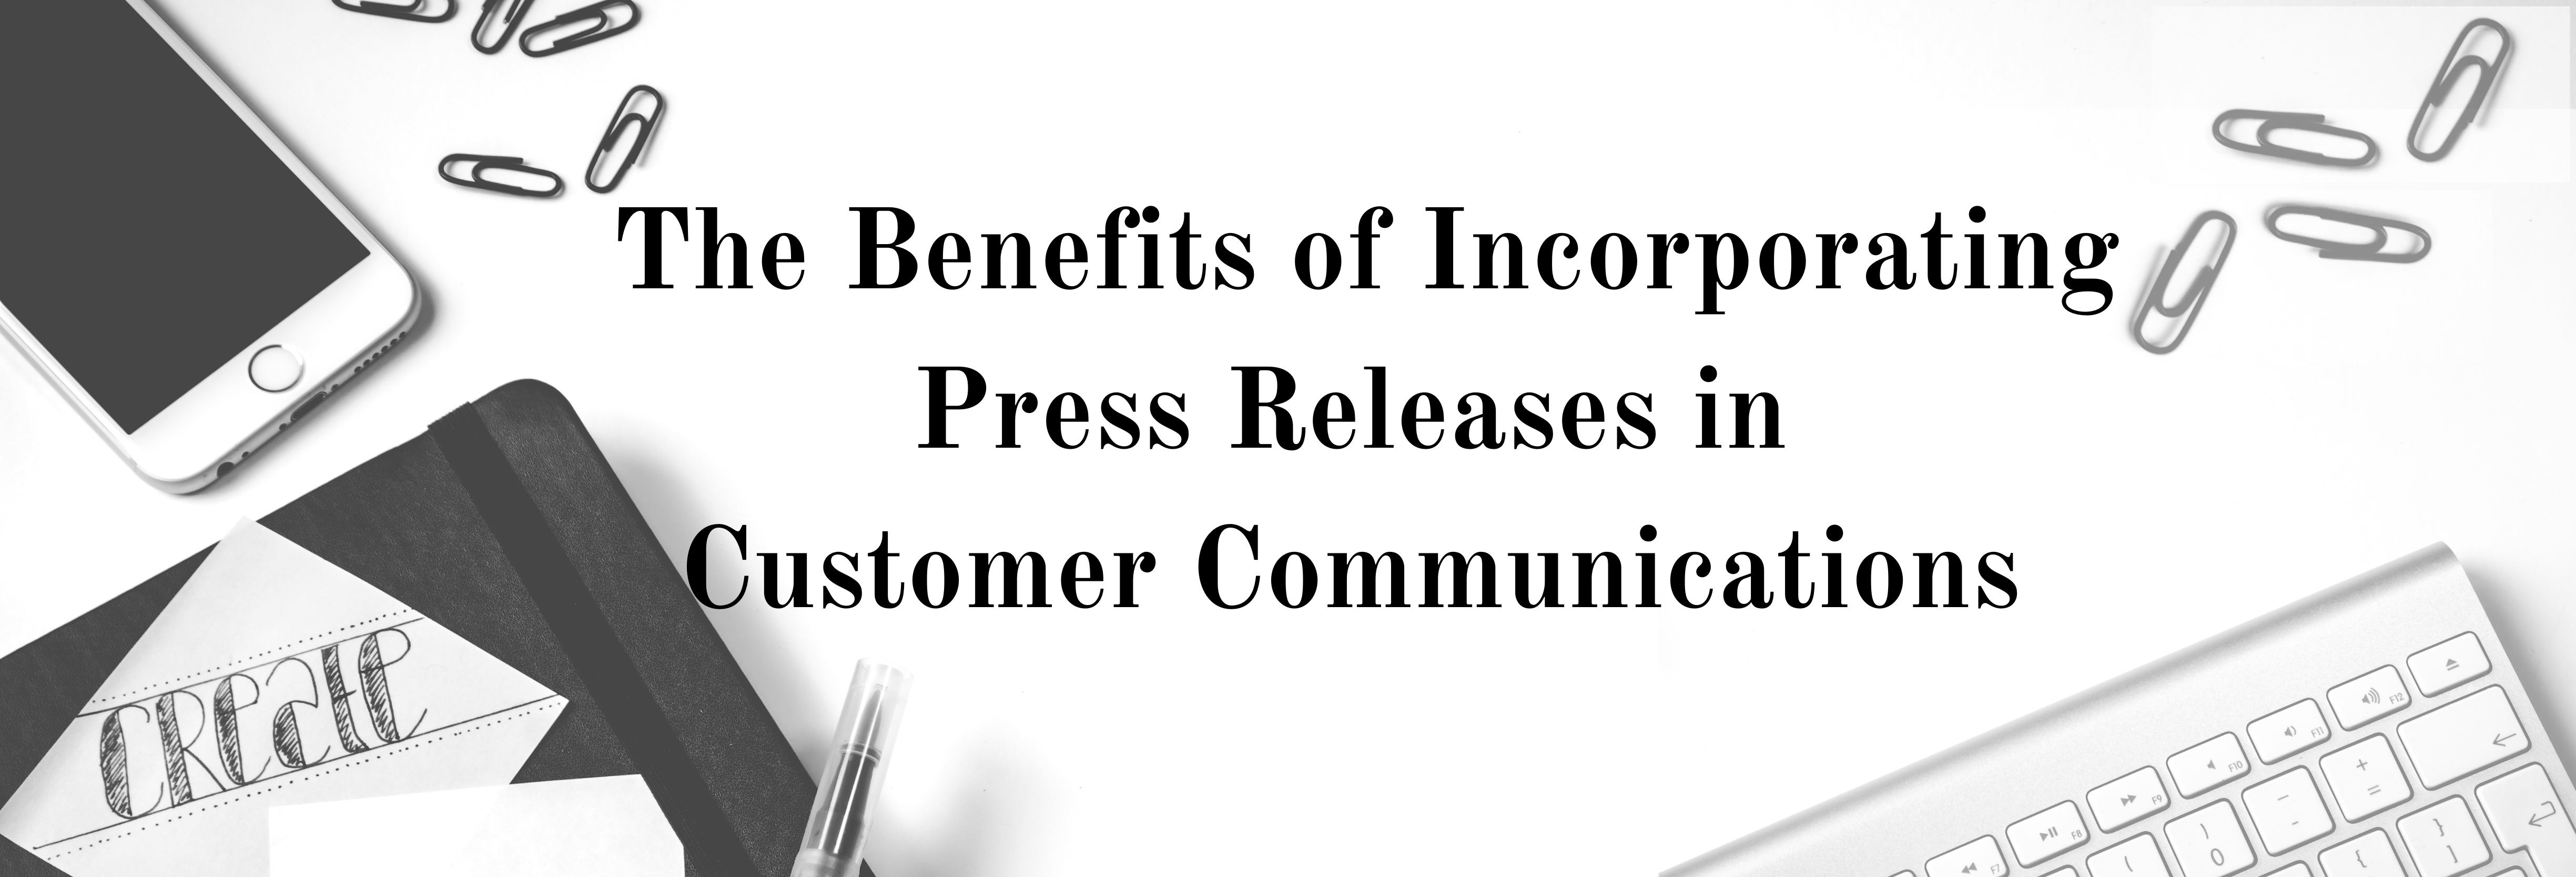 Slide Image of The Benefits of incorporating Press Releases in Customer Communications